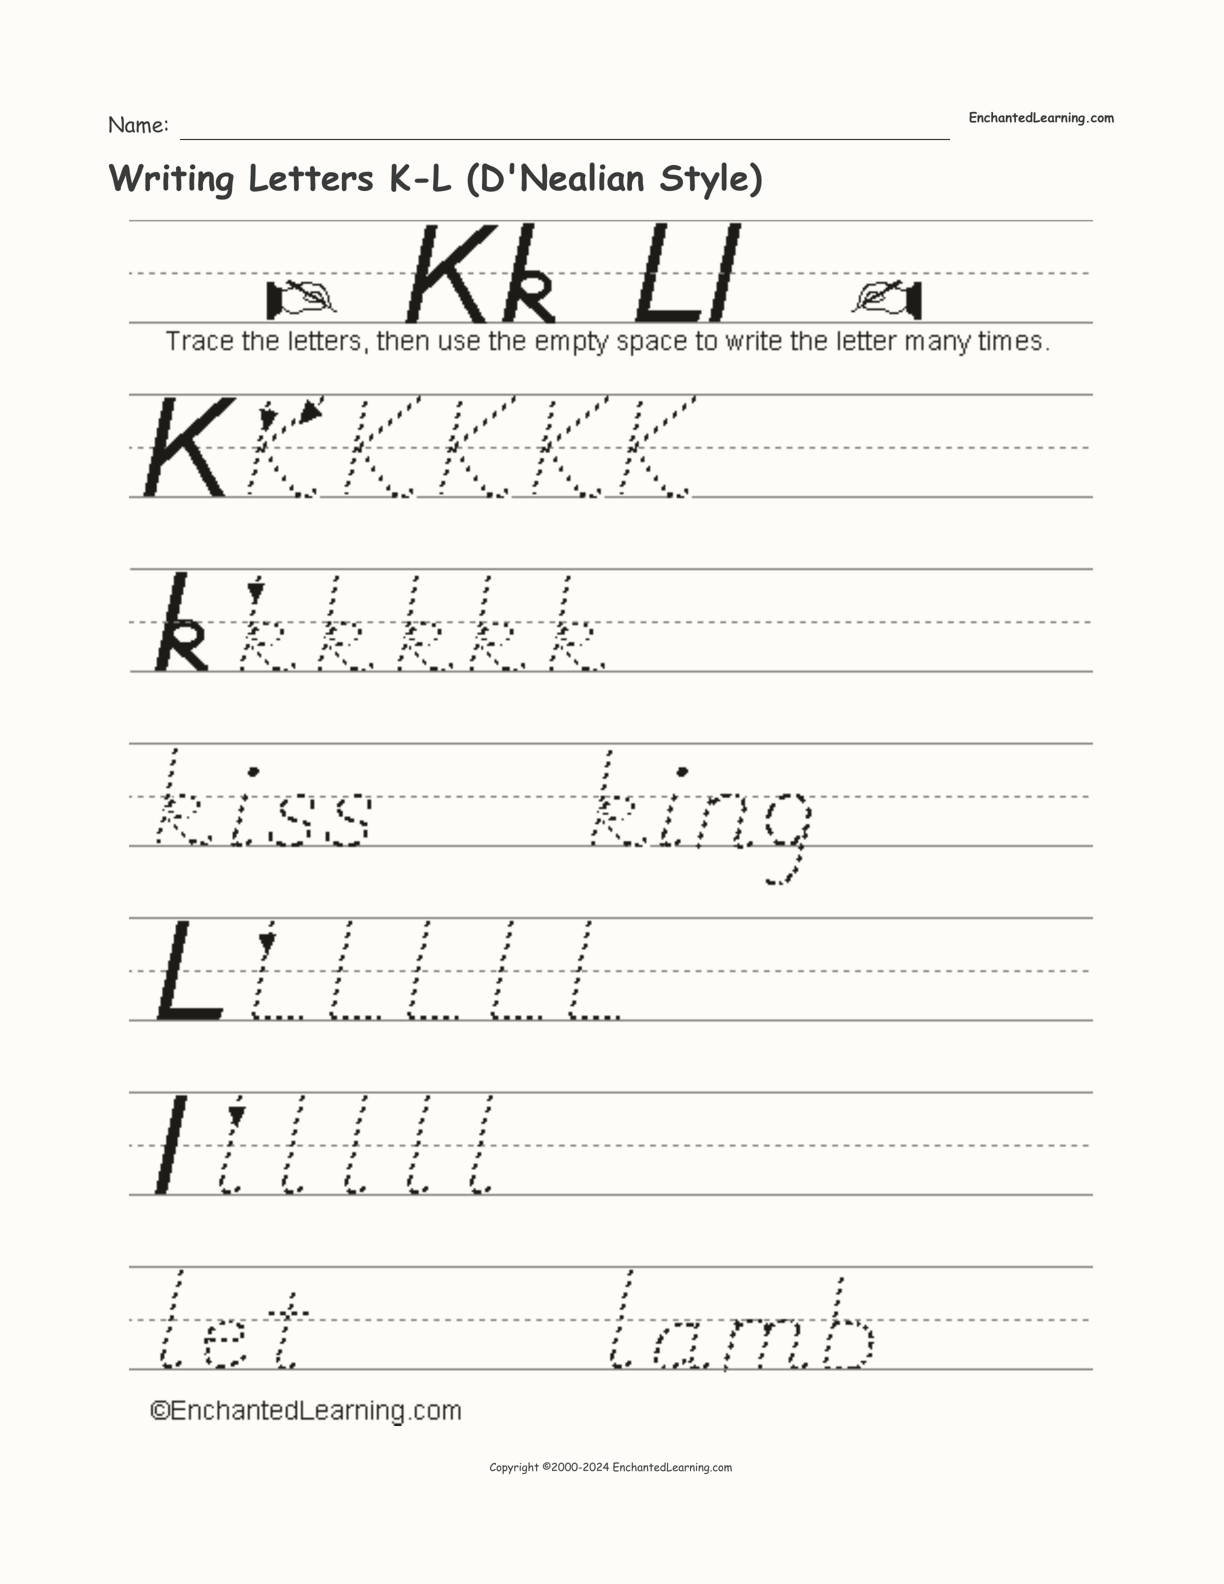 Writing Letters K-L (D'Nealian Style) interactive worksheet page 1